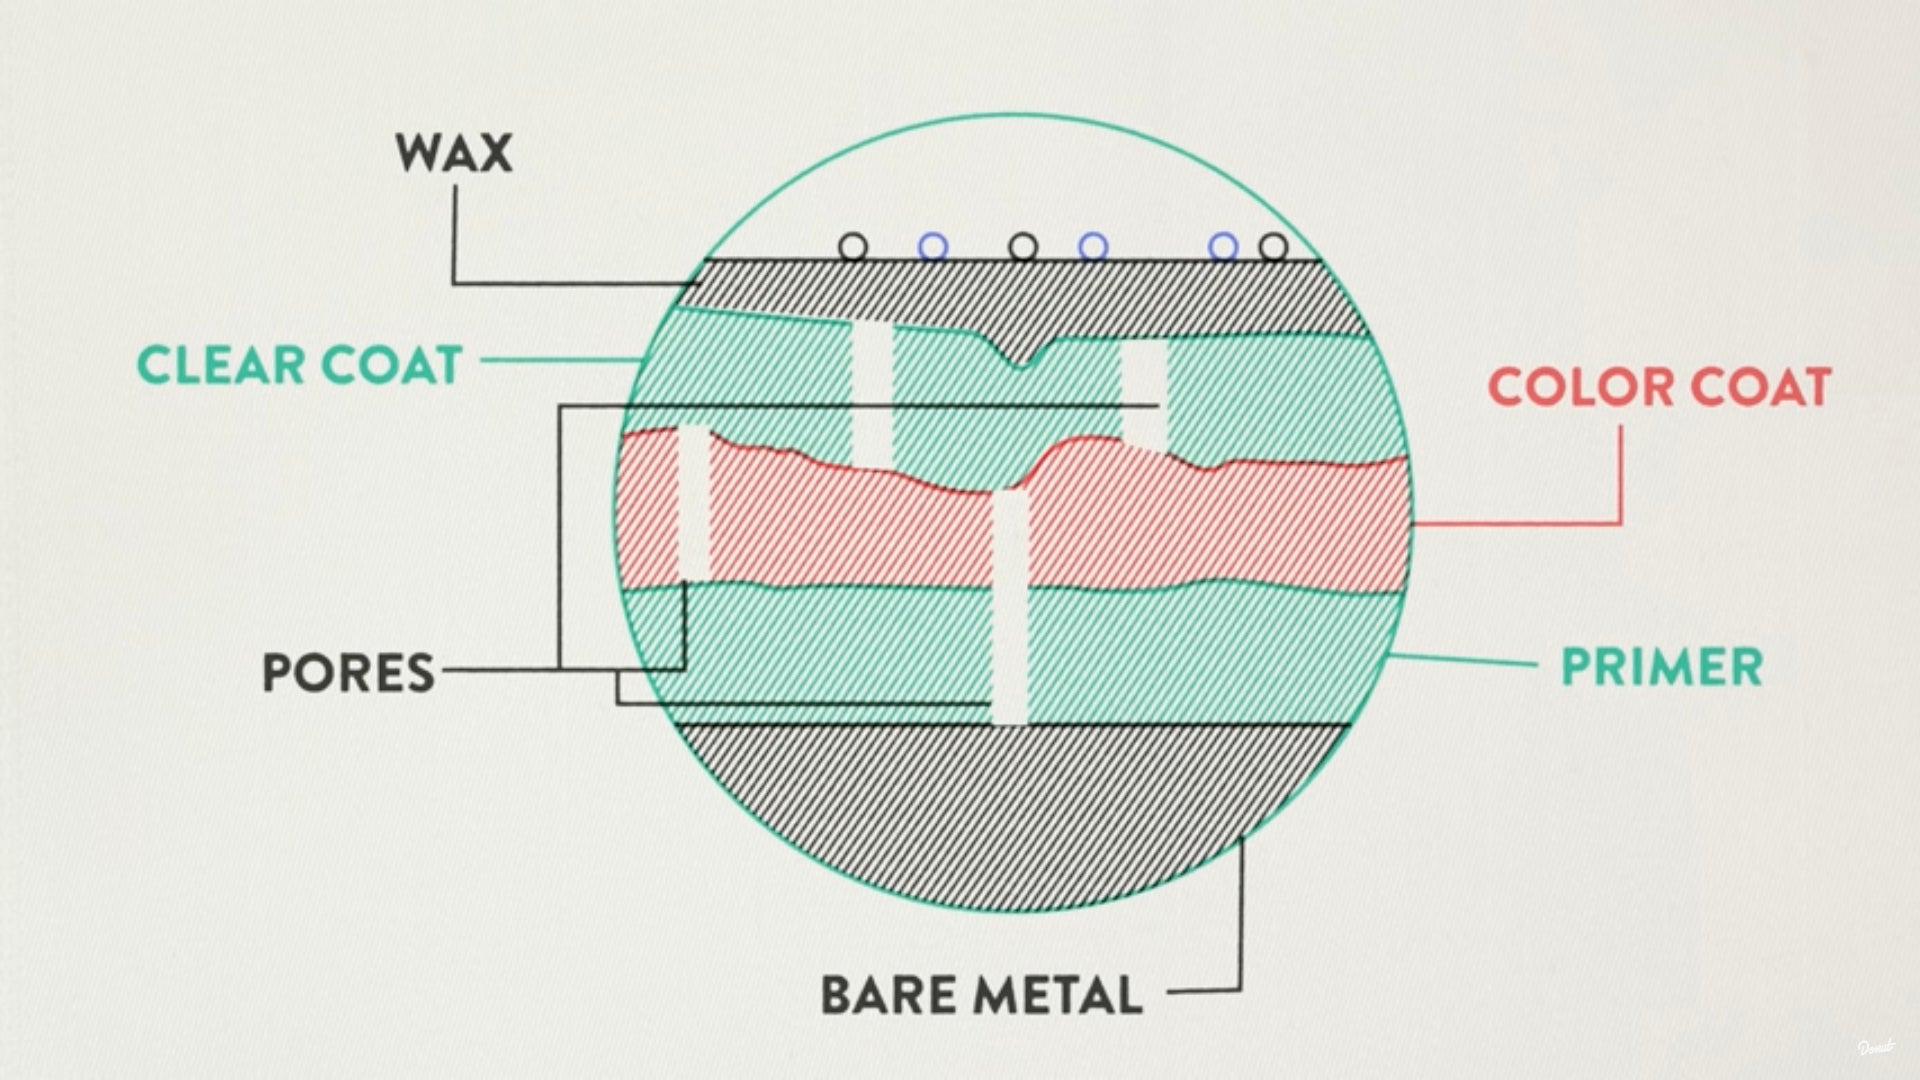 How wax interacts with paint at a microscopic level.